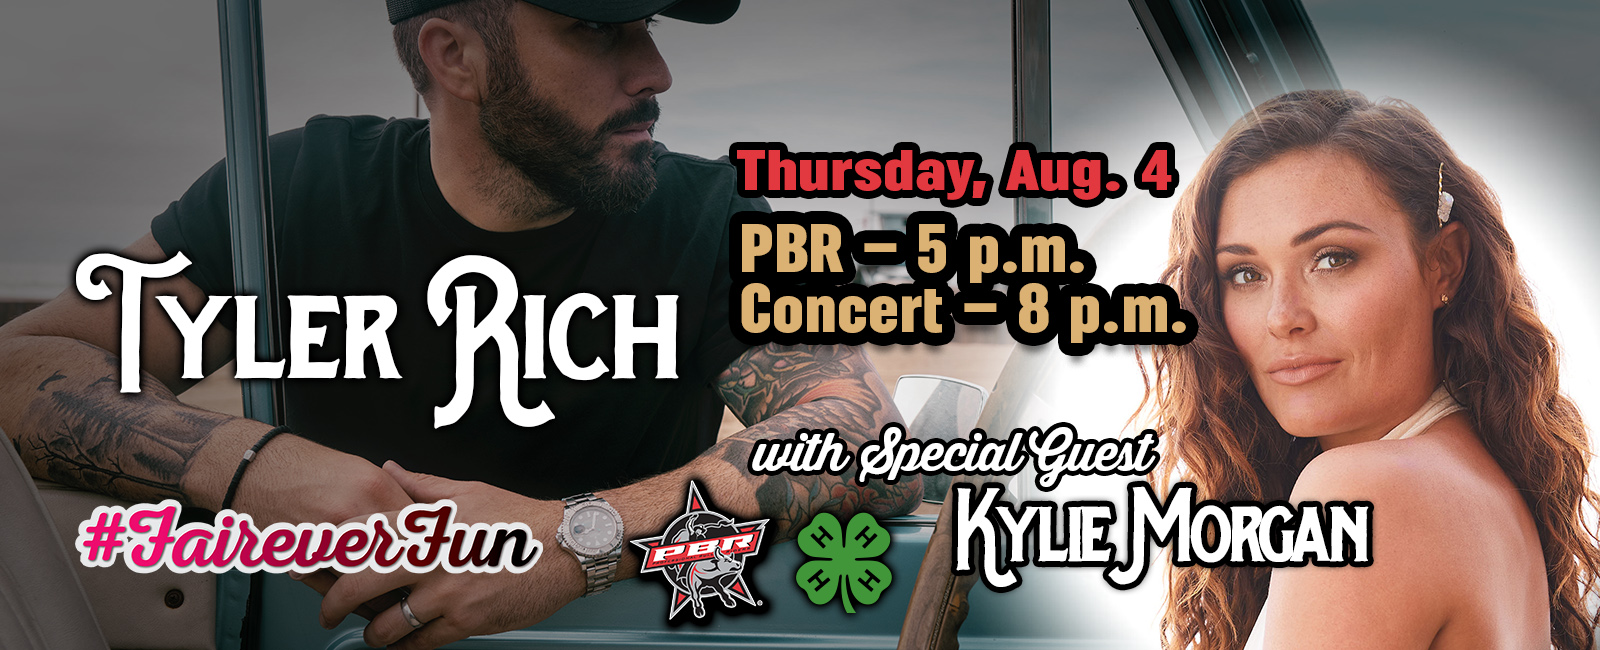 Tyler Rich with Special Guest Kylie Morgan